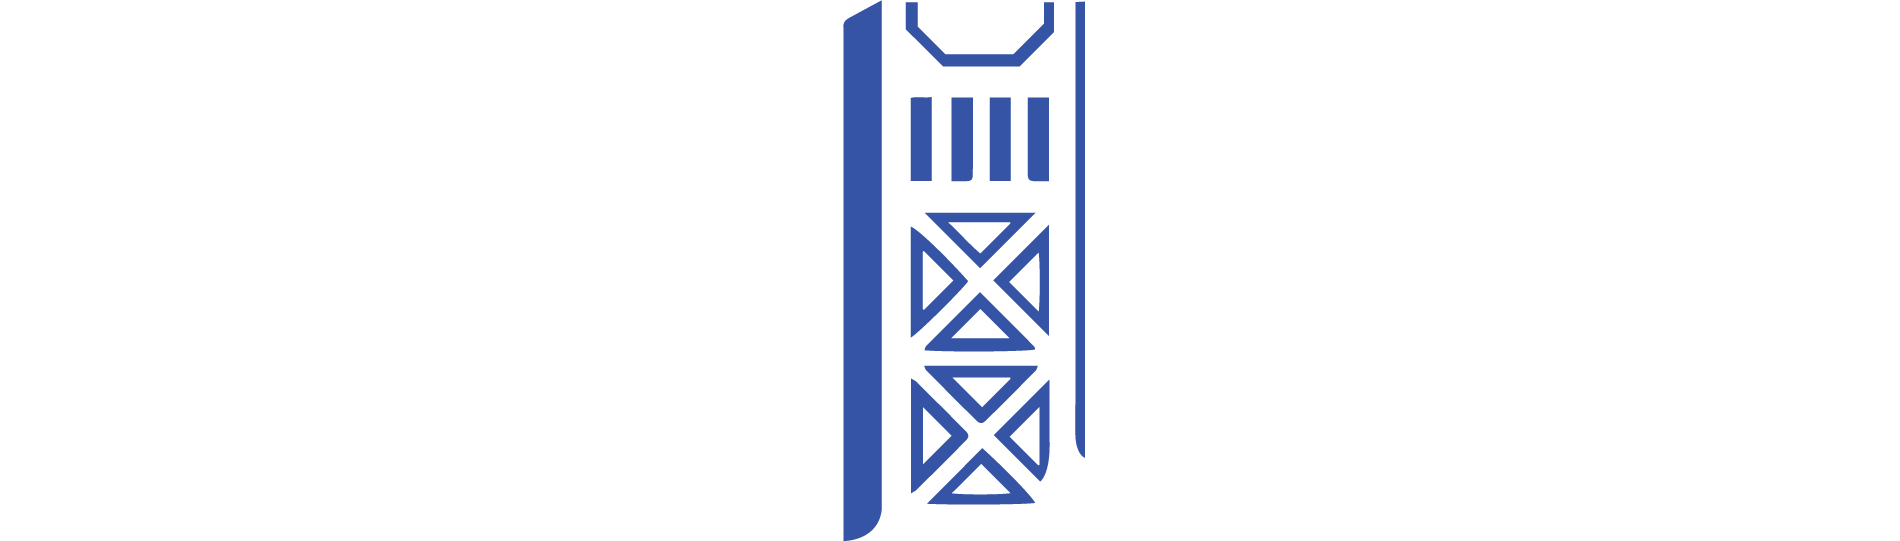 Twin Rivers Wealth Management